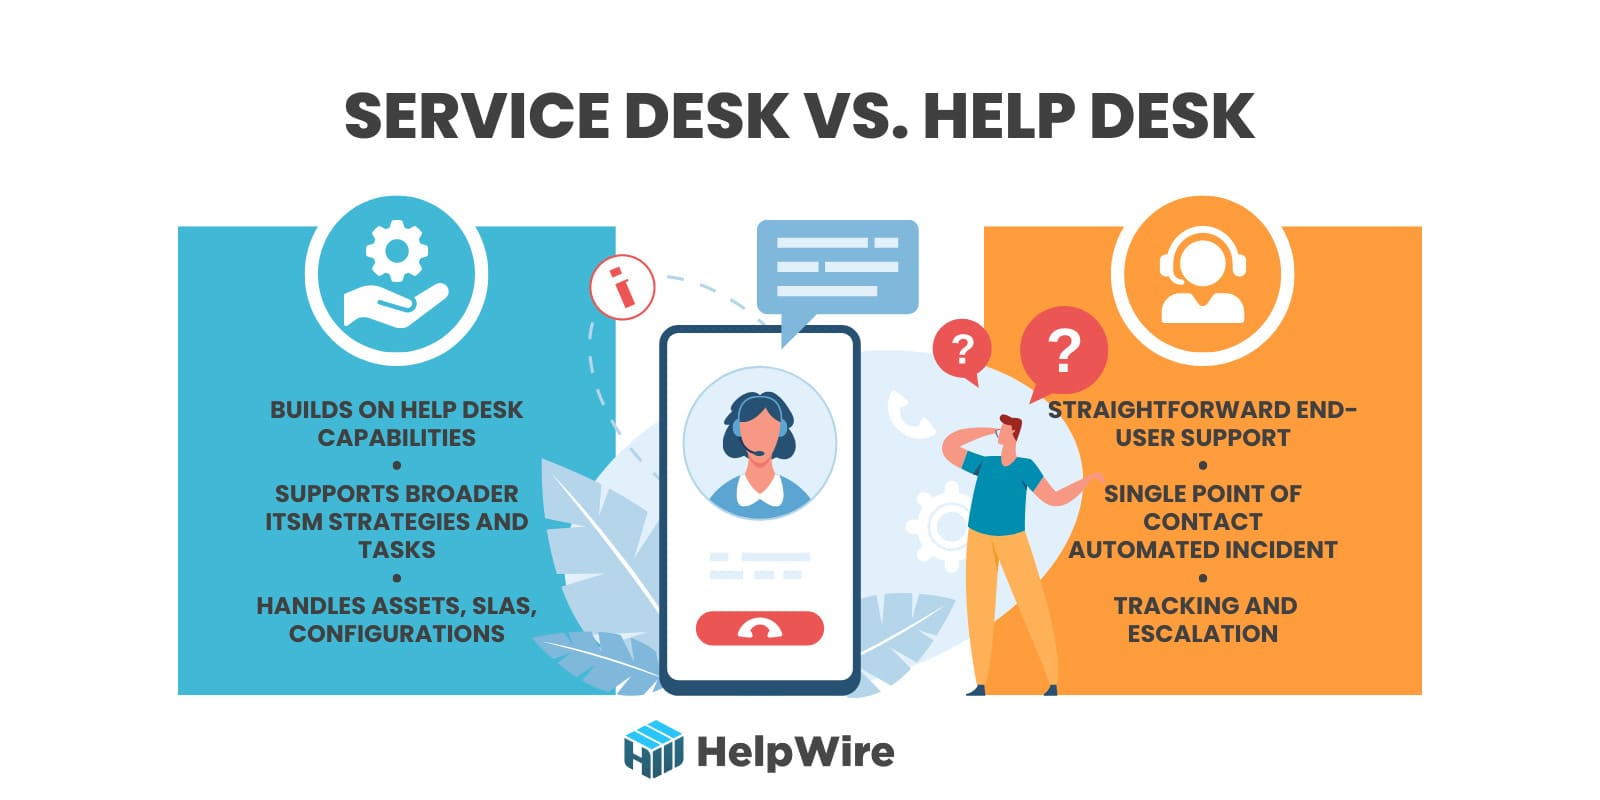 service desk vs help desk: what’s the difference